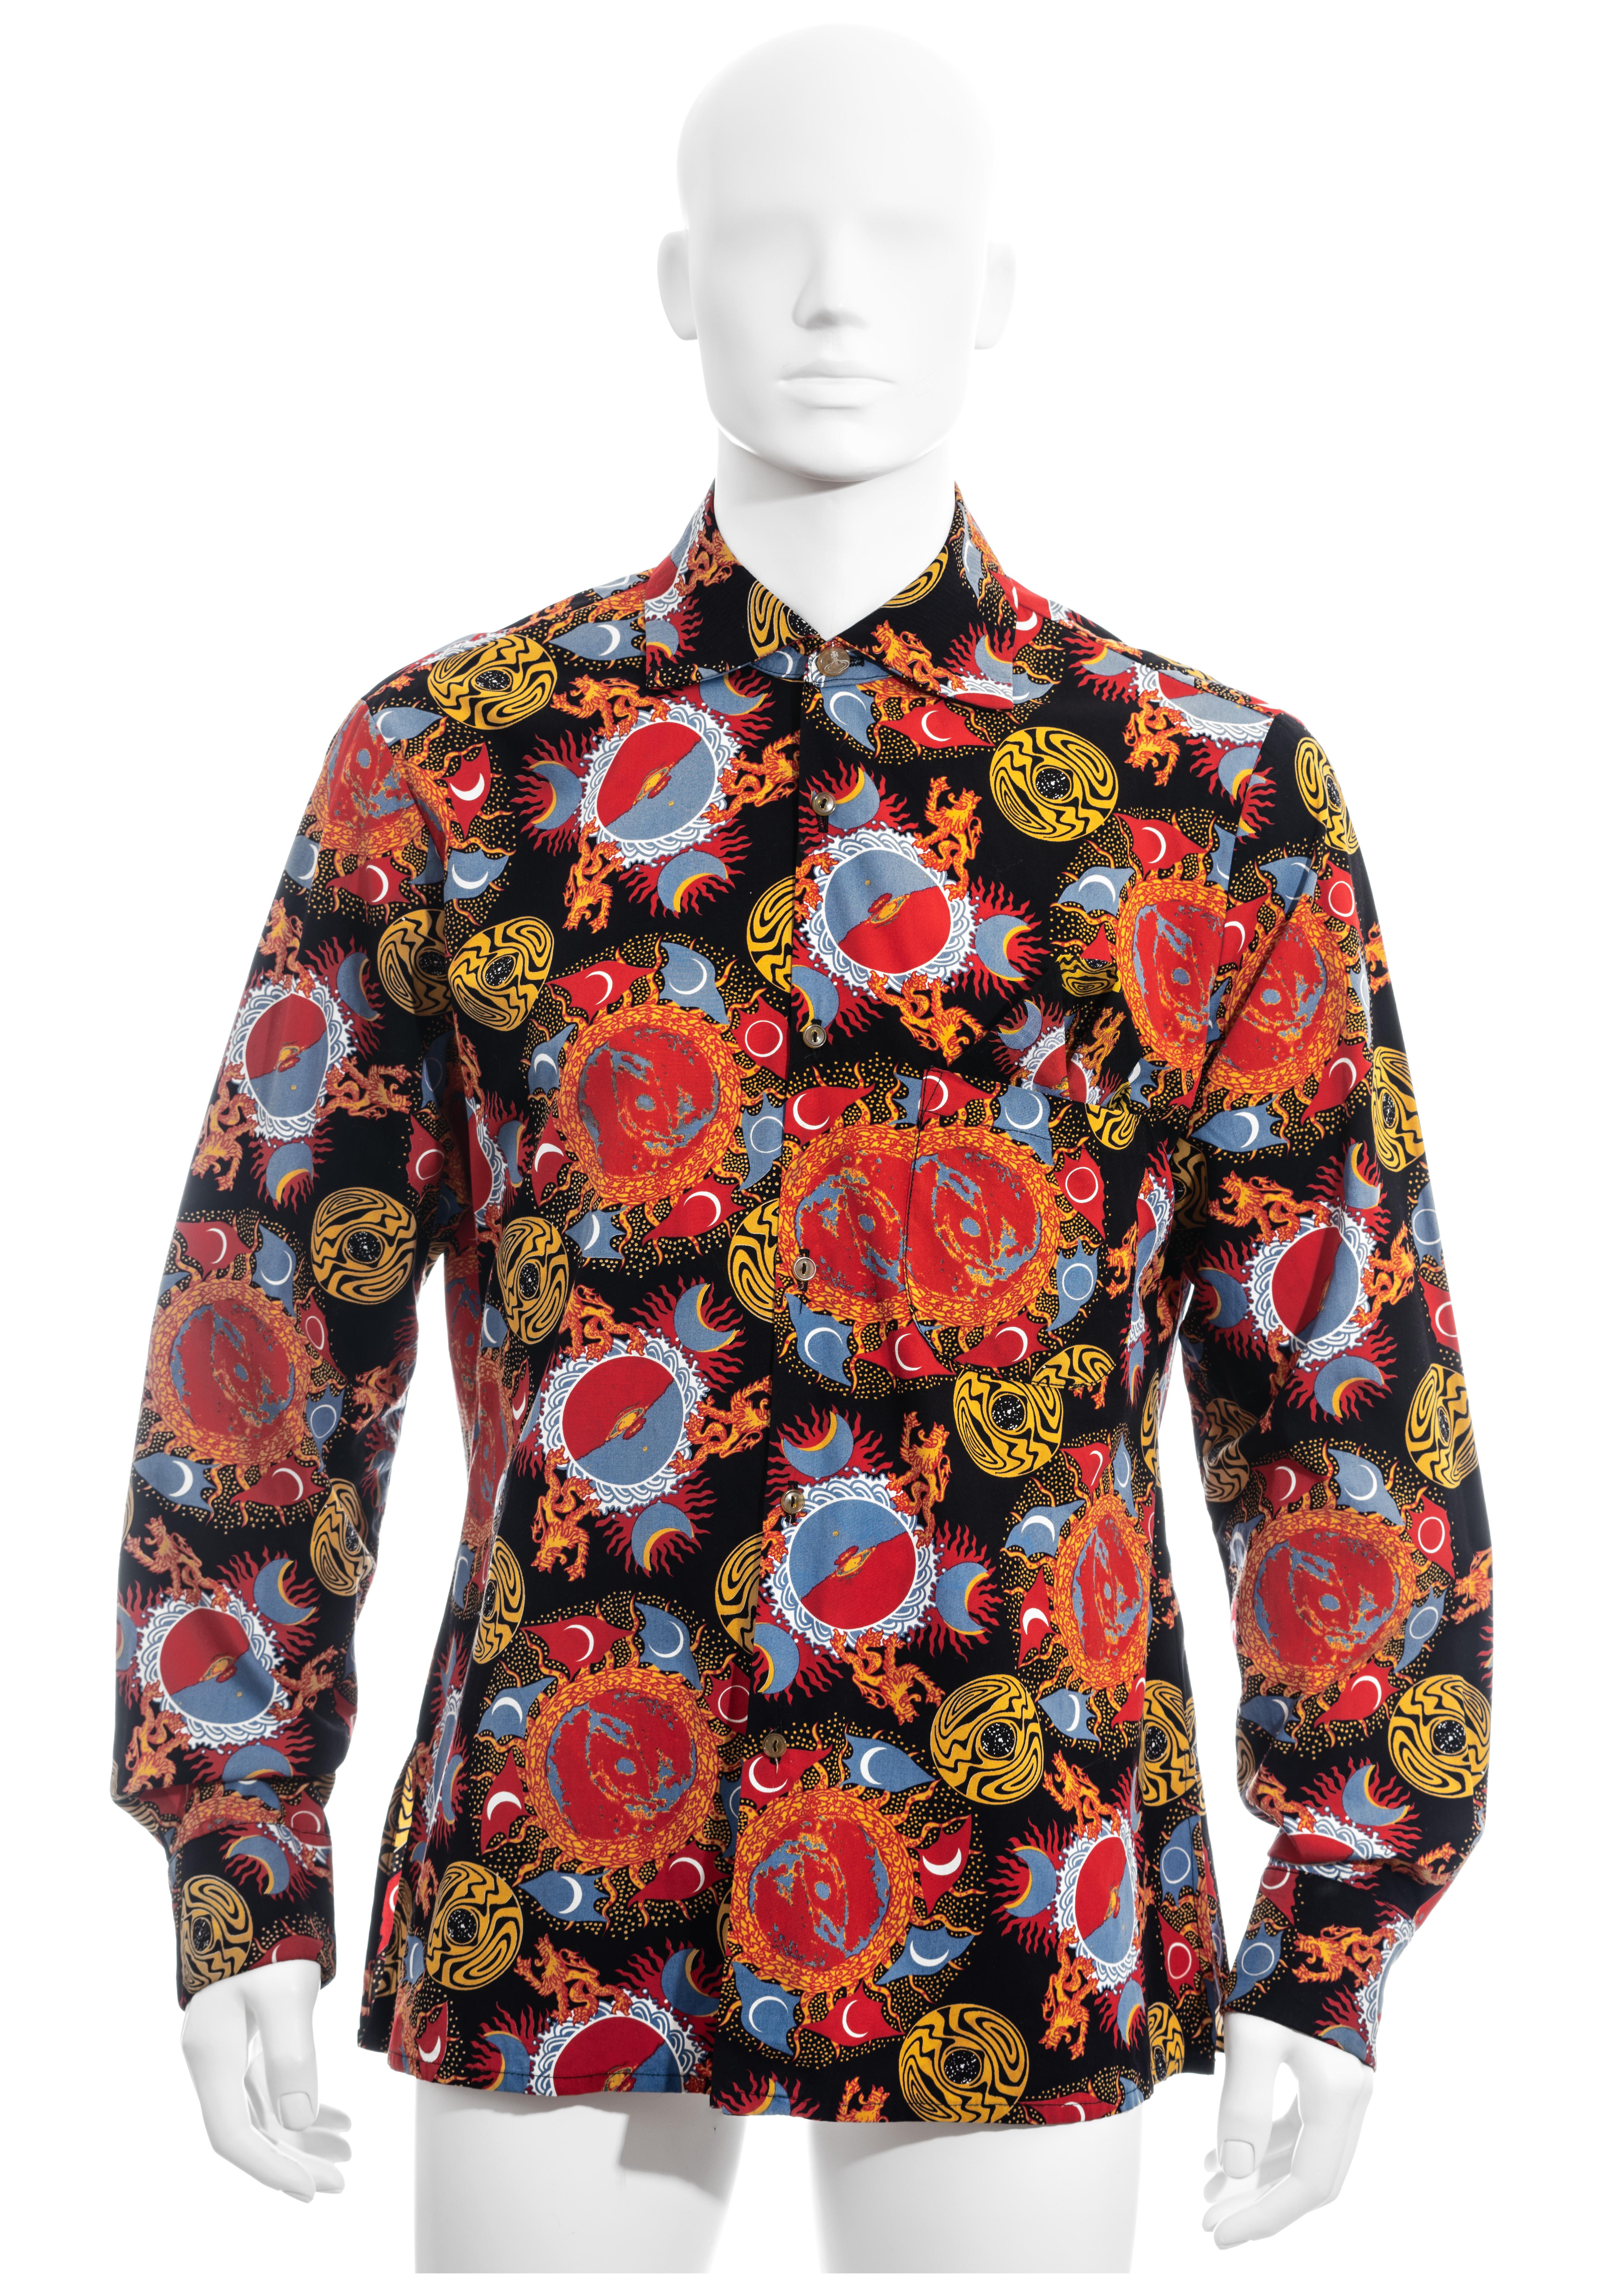 ▪ Men's Vivienne Westwood galaxy print shirt
▪ 100% Cotton
▪ Matching pocket square 
▪ 'Time Machine' collection
▪ Size 40 
▪ Spring-Summer 1988